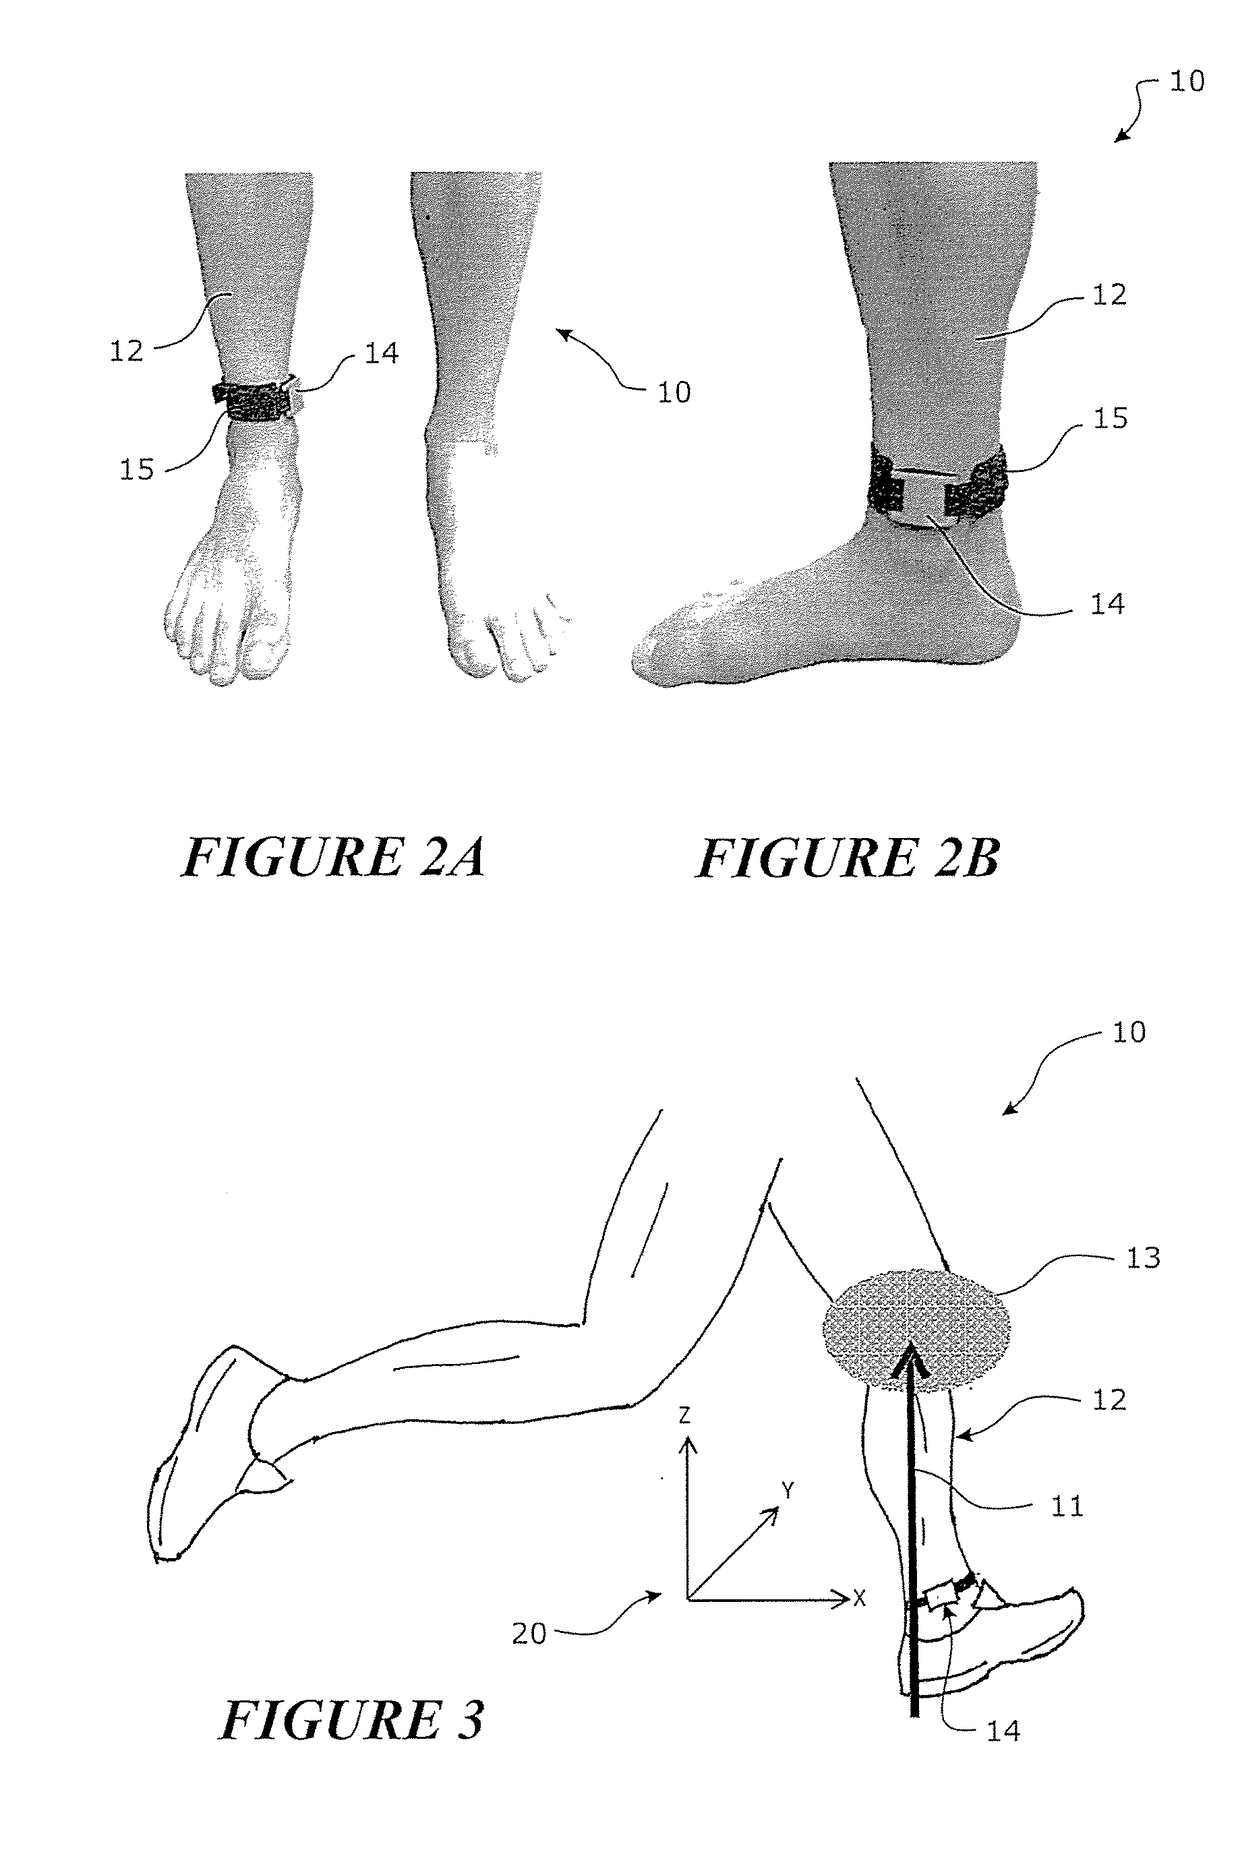 Lower limb loading assessment systems and methods